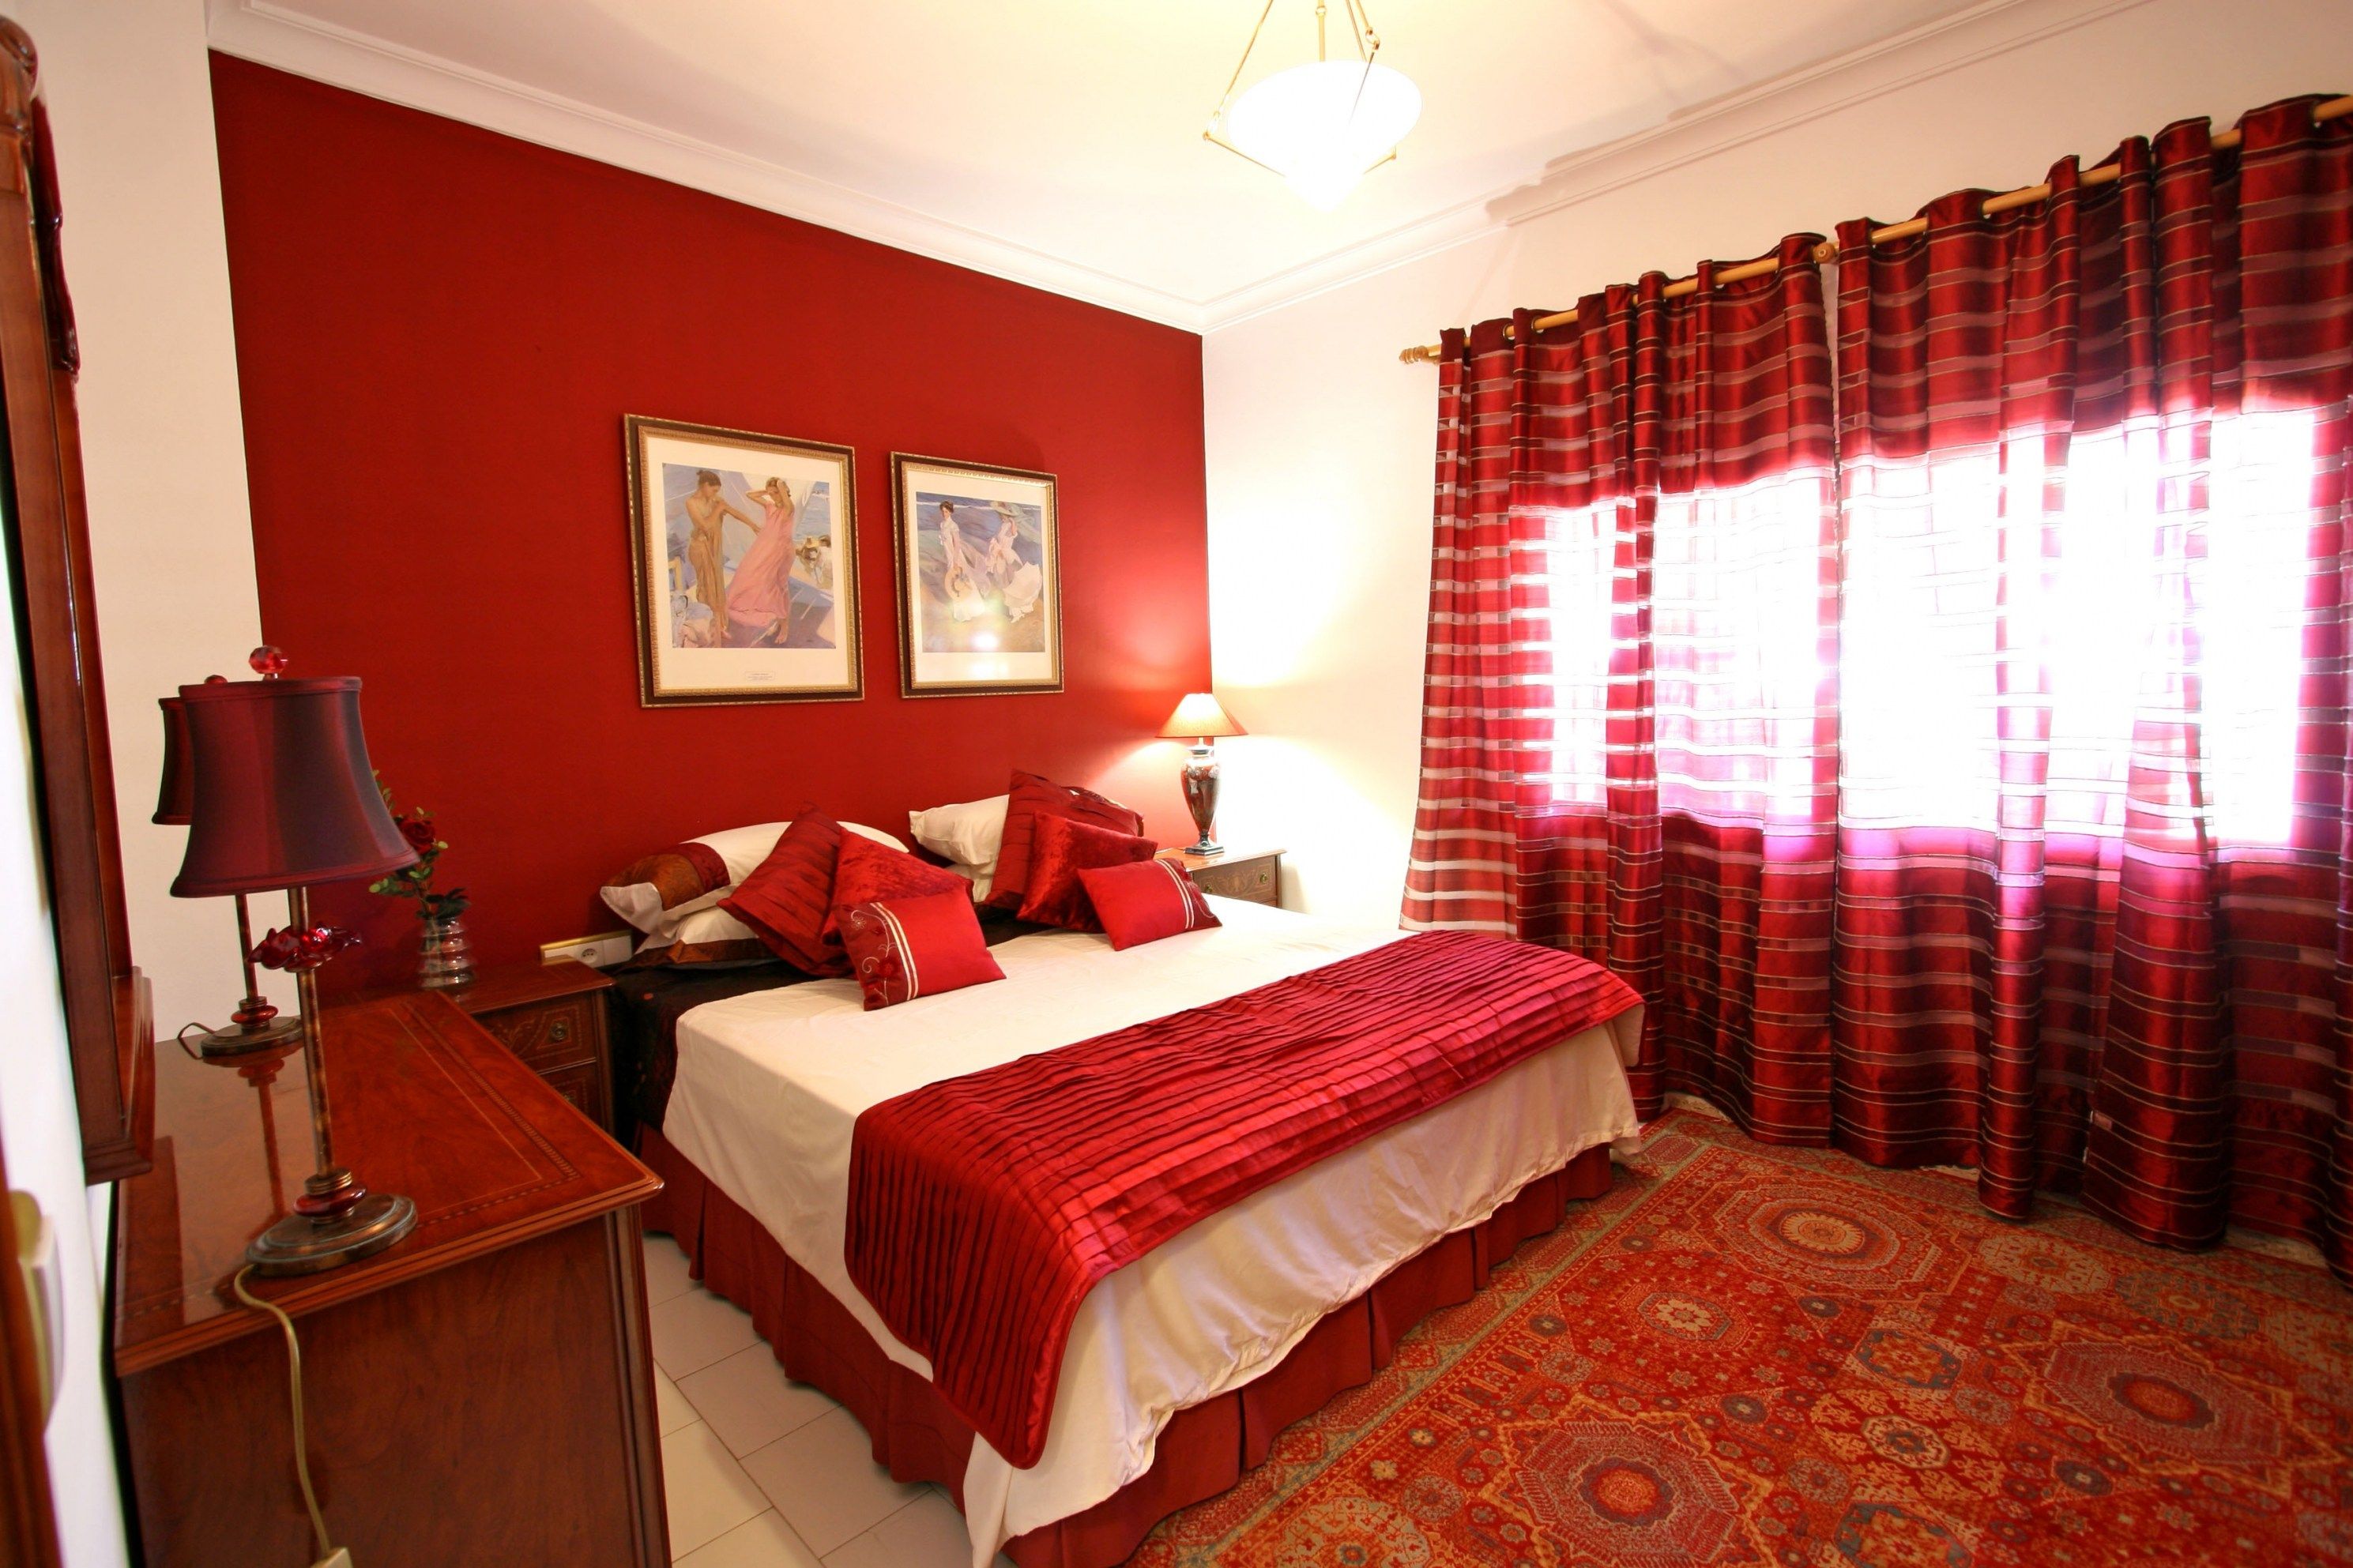 Modern Bedroom In Licorice Muslin And Red